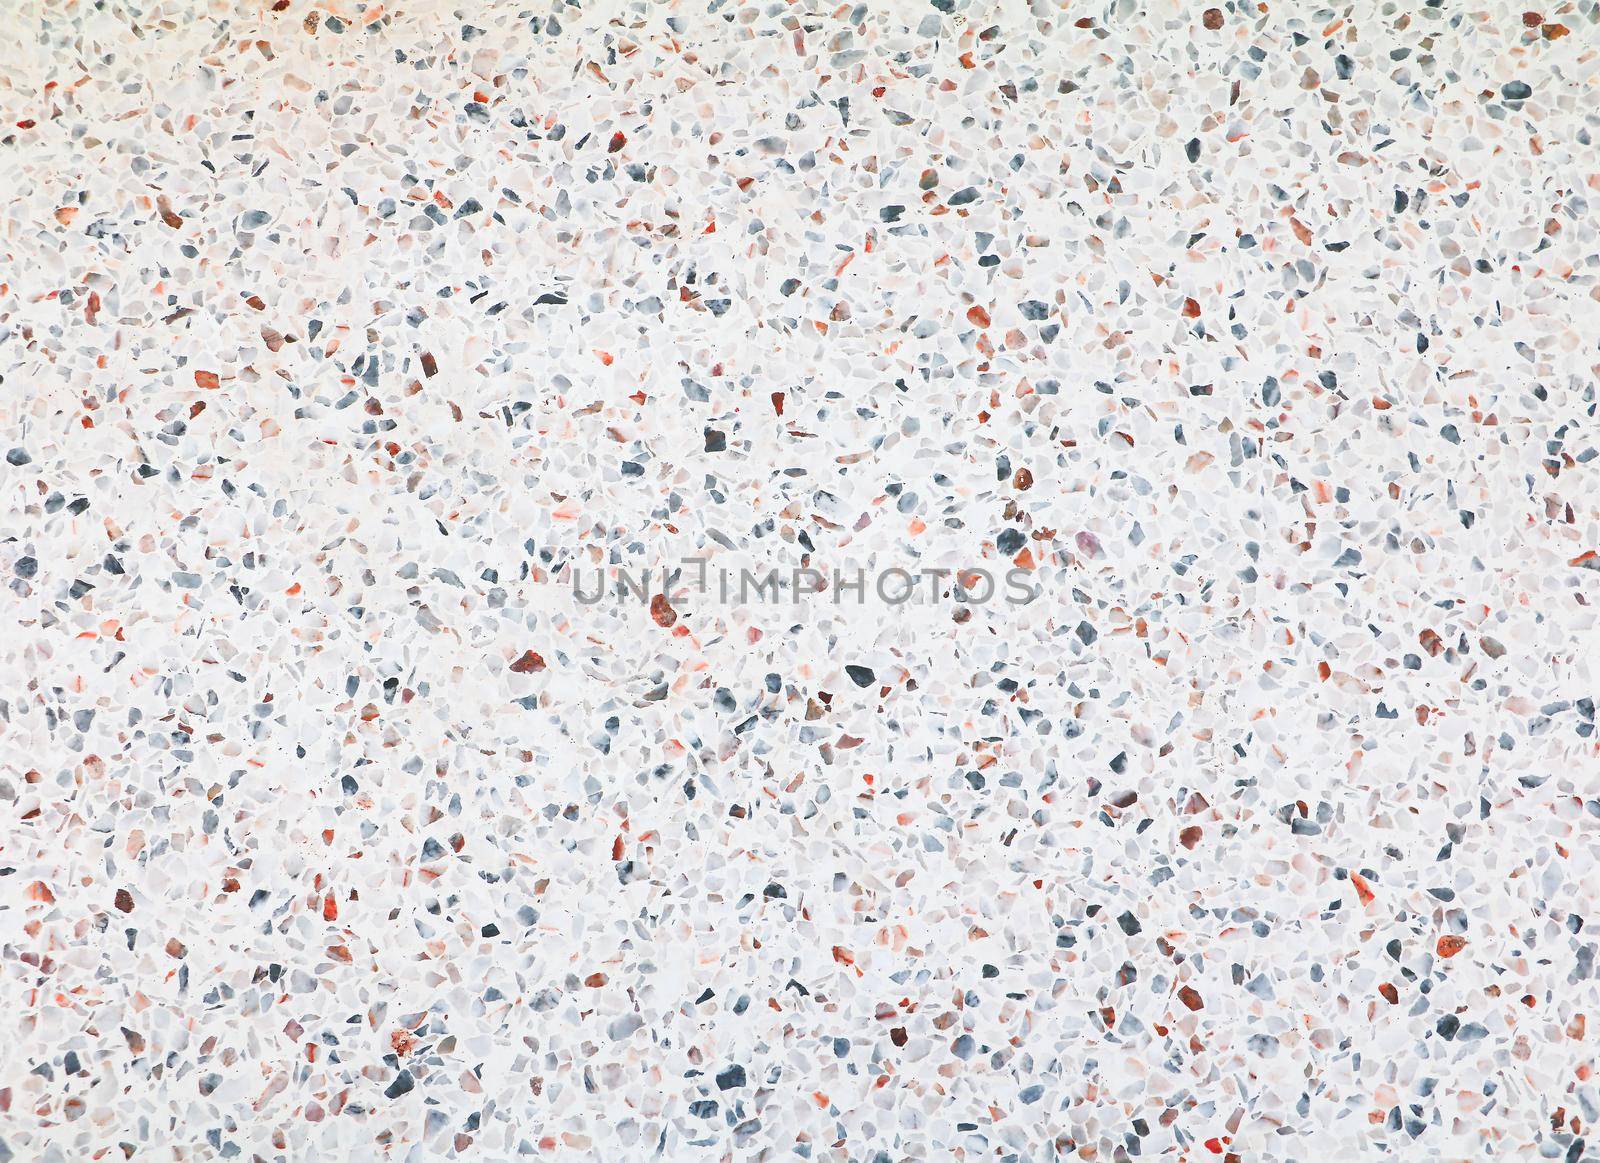 terrazzo flooring texture polished stone pattern wall and color old surface marble for background image horizontal by pramot